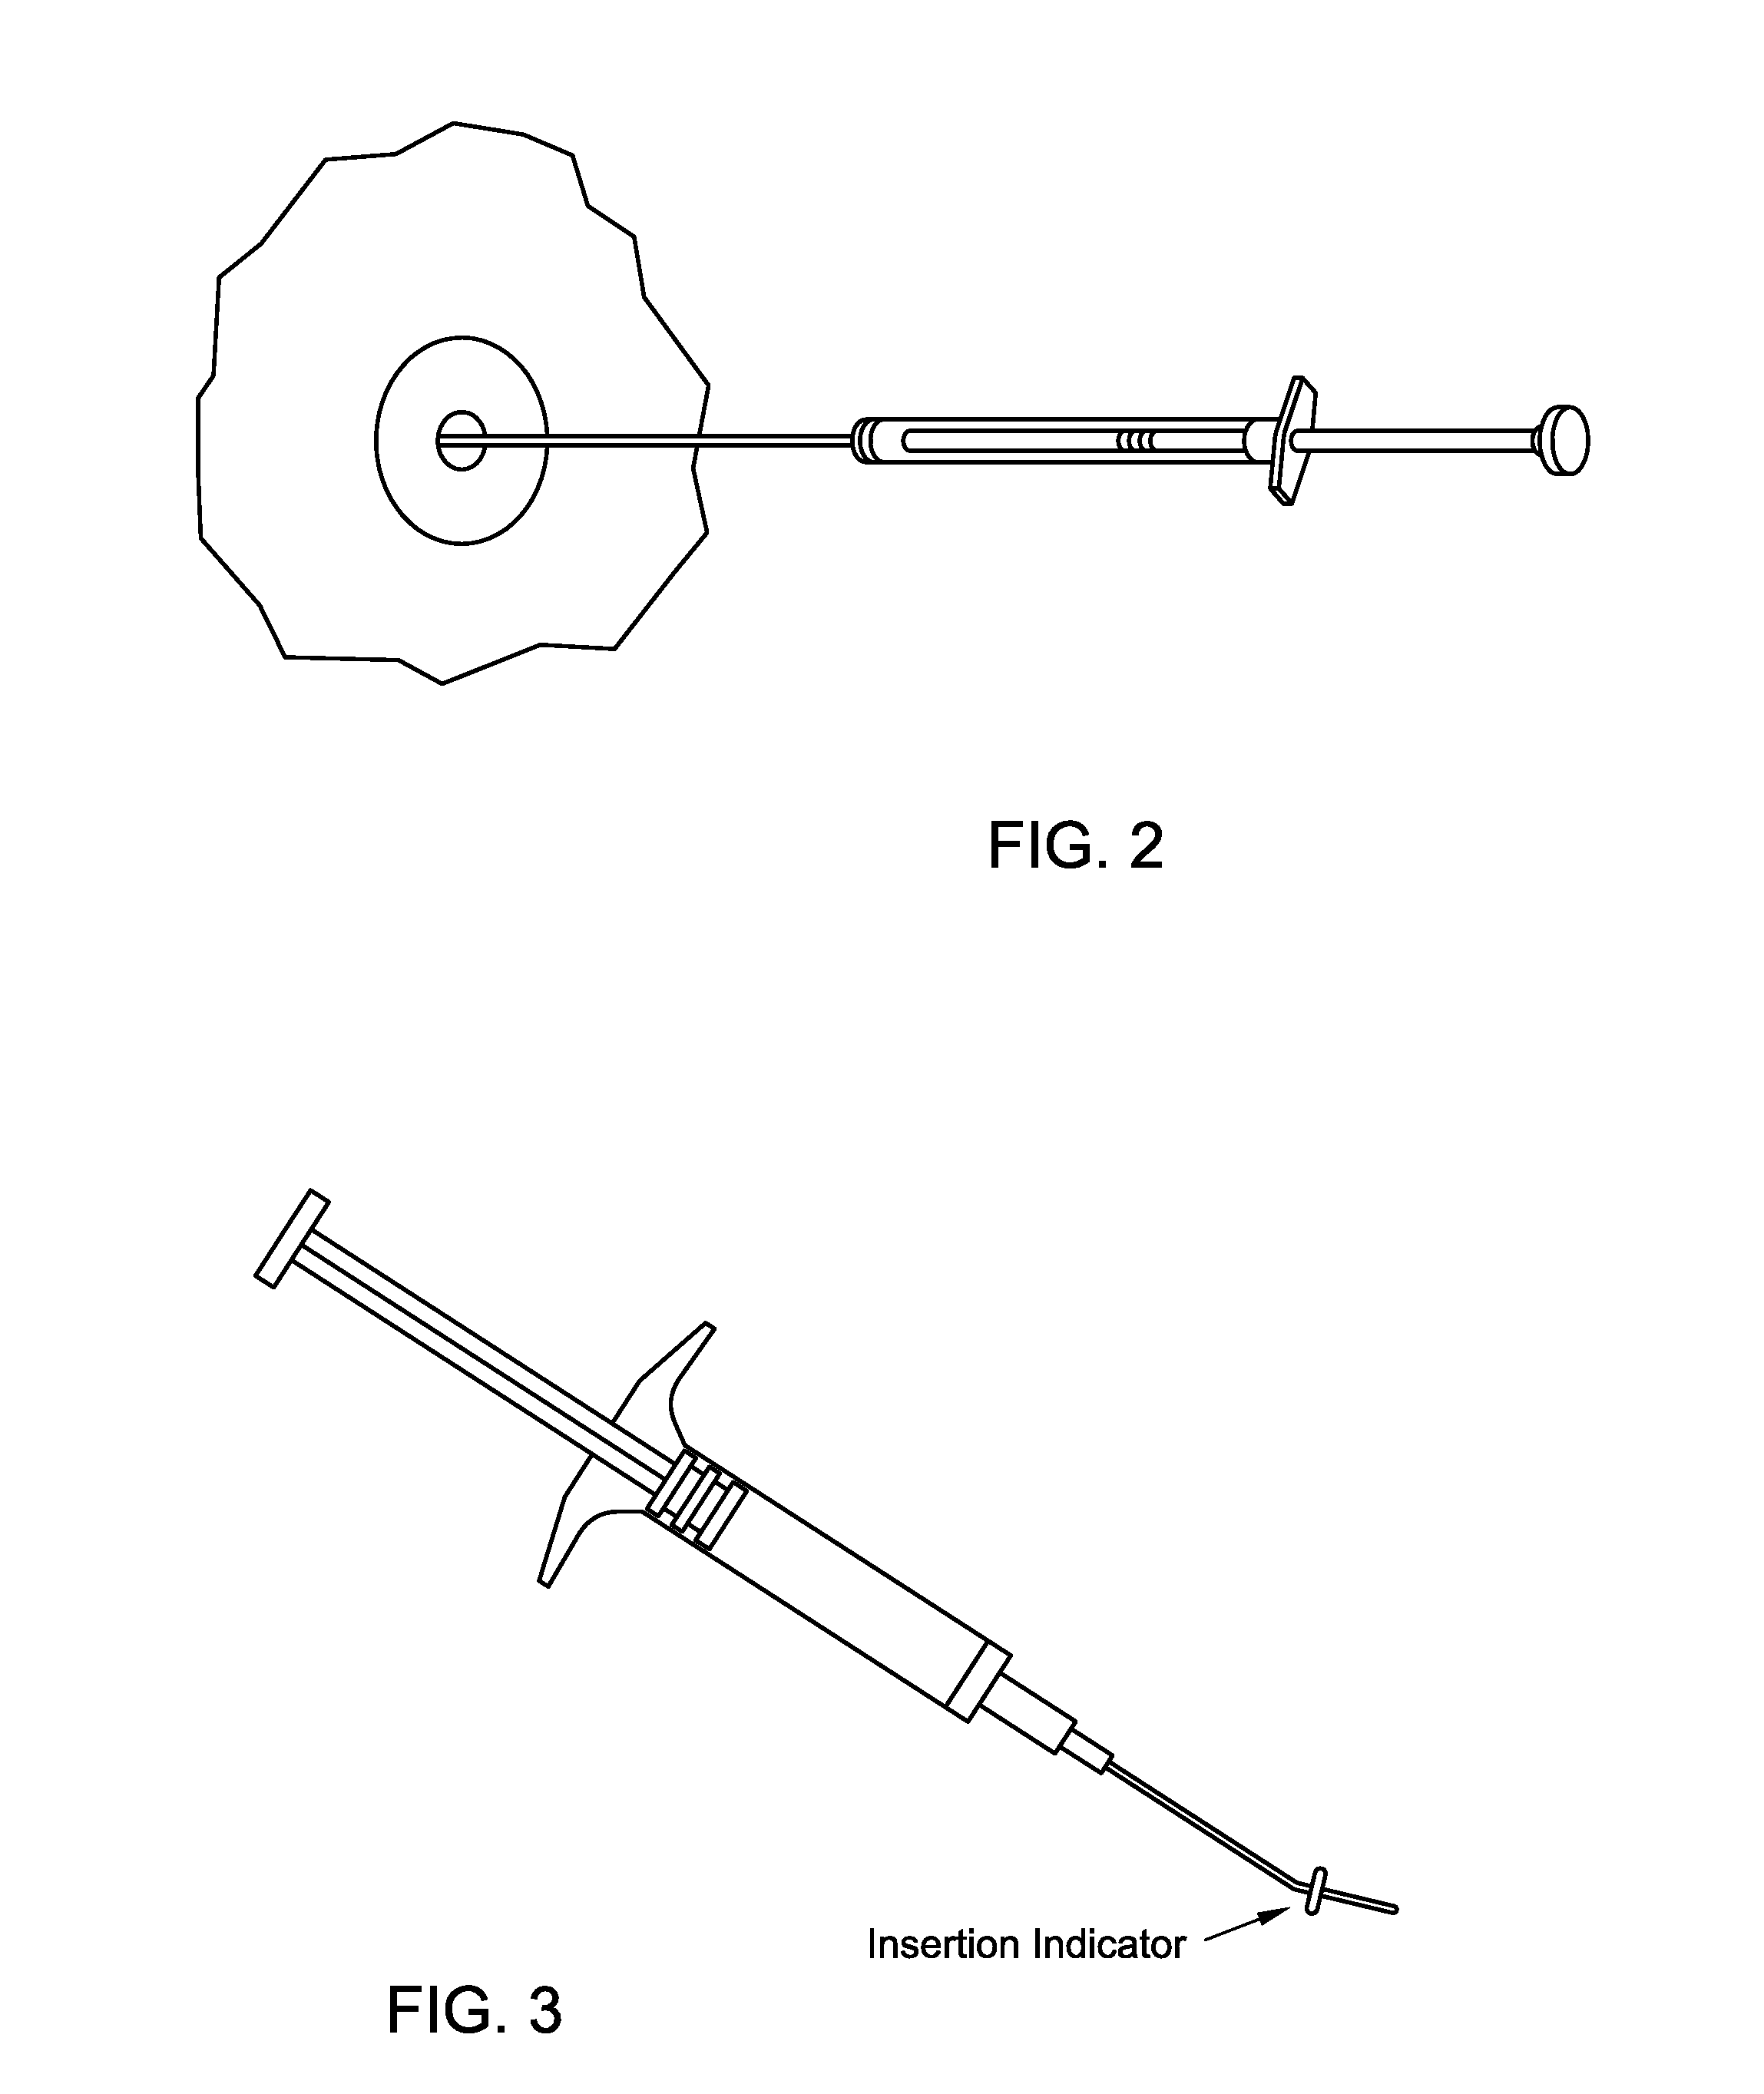 Method for treating otic infections after tympanostomy tube placement